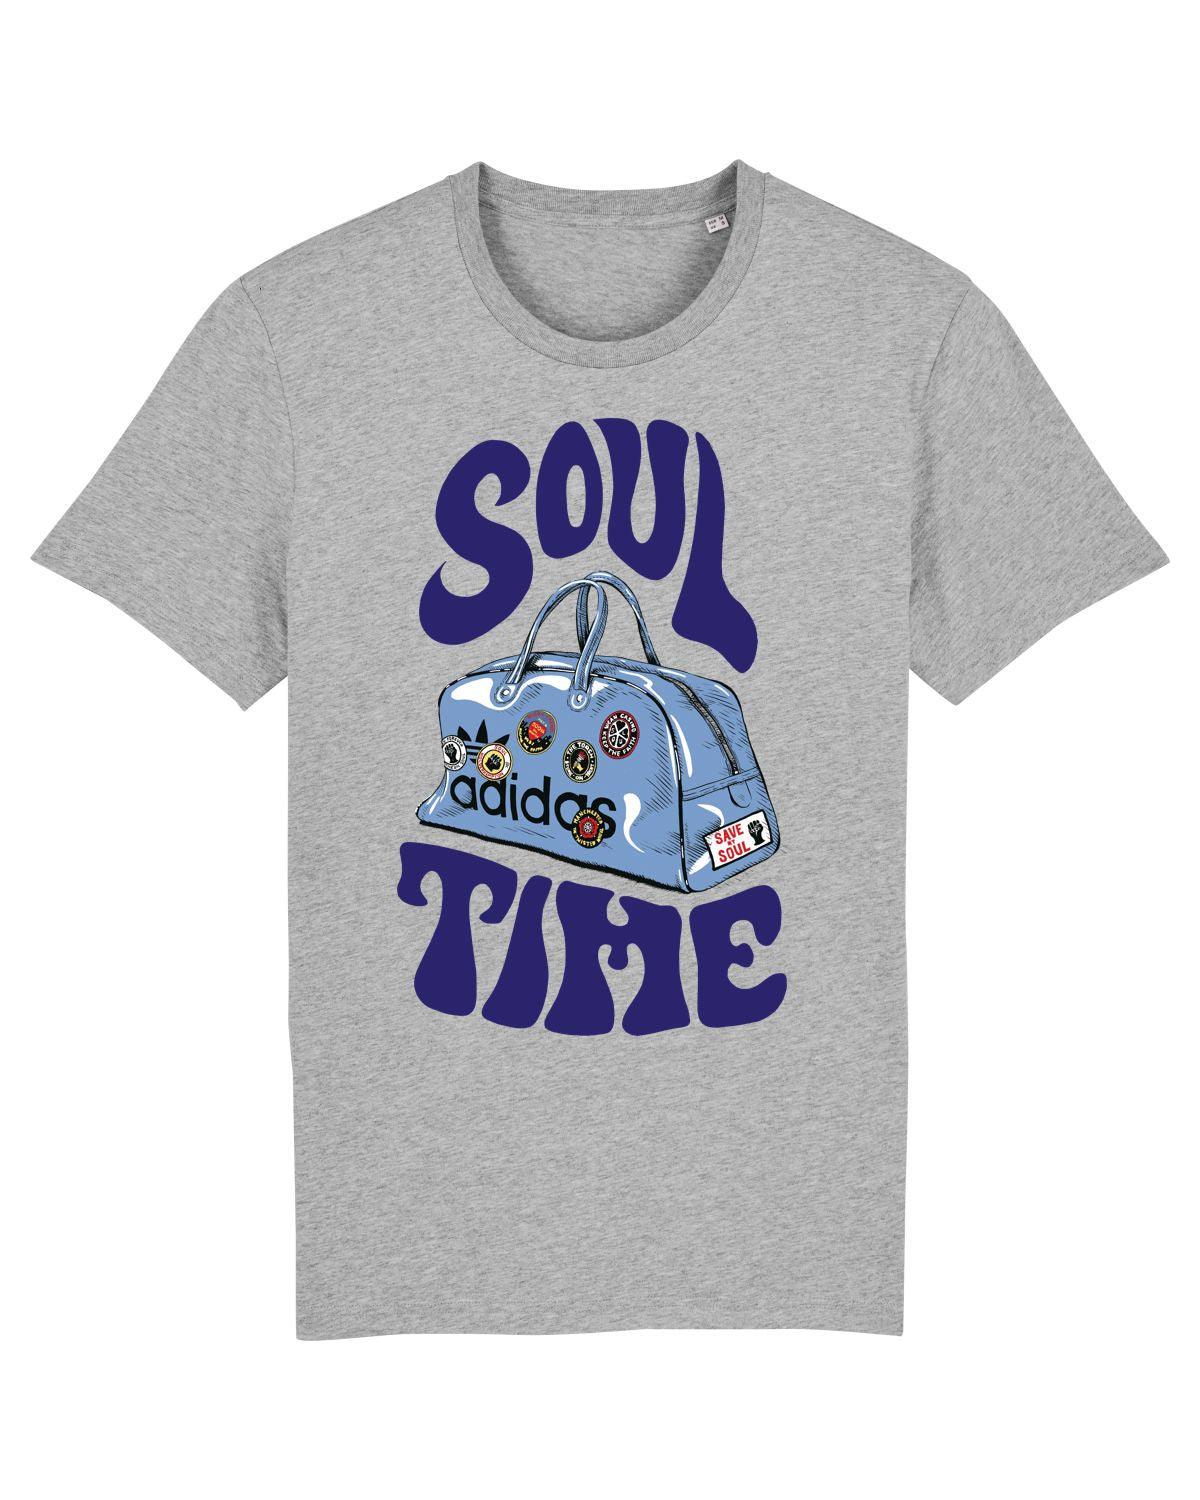 SOUL TIME: T-Shirt Inspired by Northern Soul Allnighters (3 Colours) - Suit Yourself Music